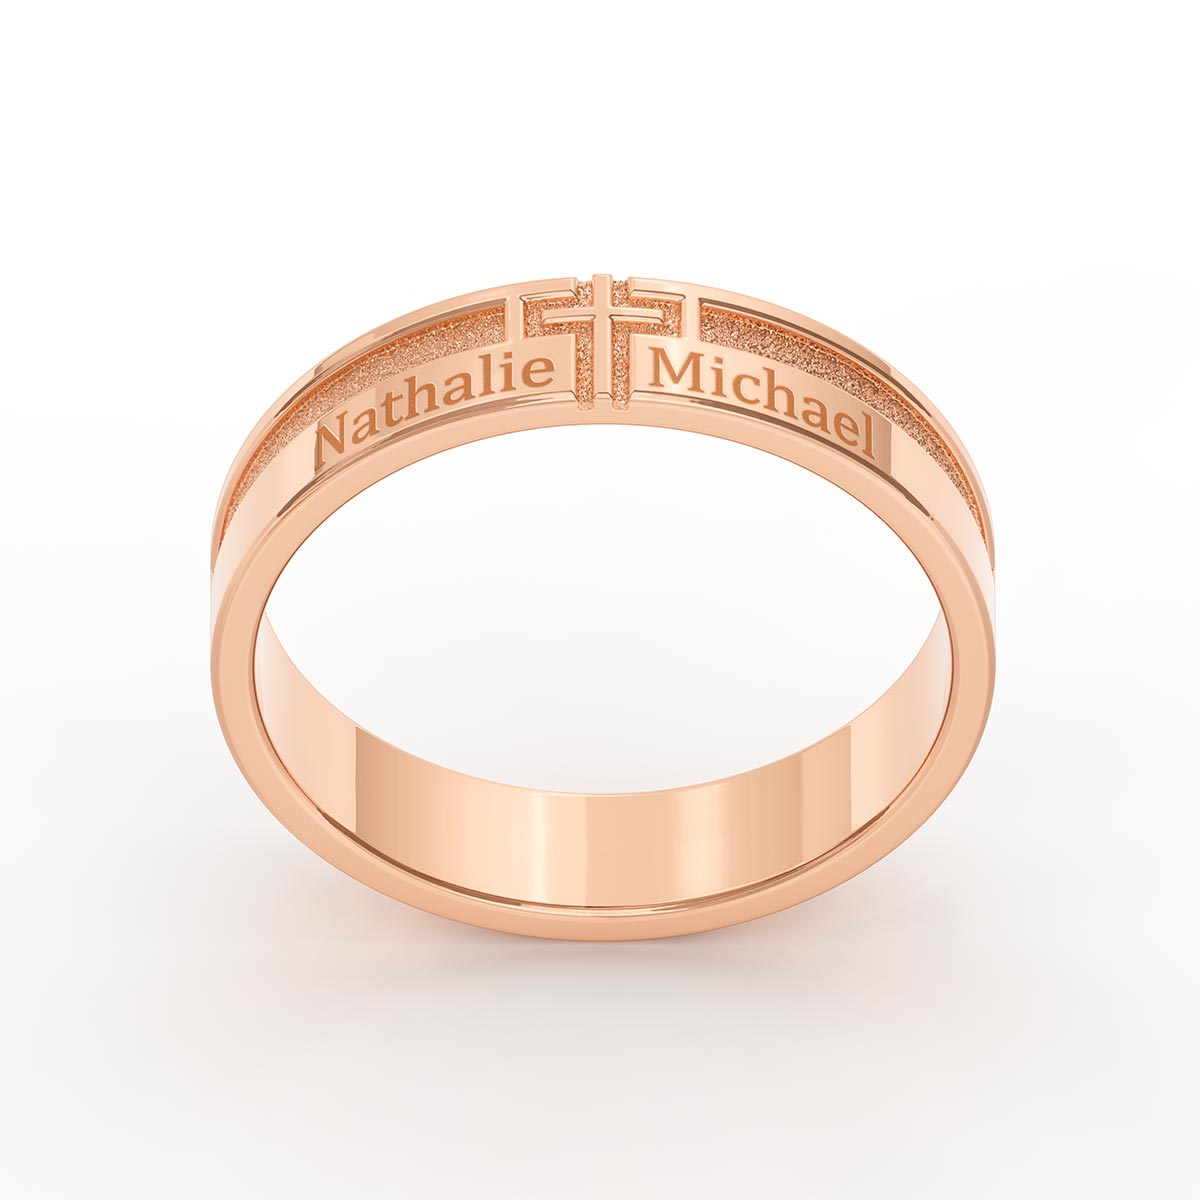 Men's Cross Ring with Personalized Engravings